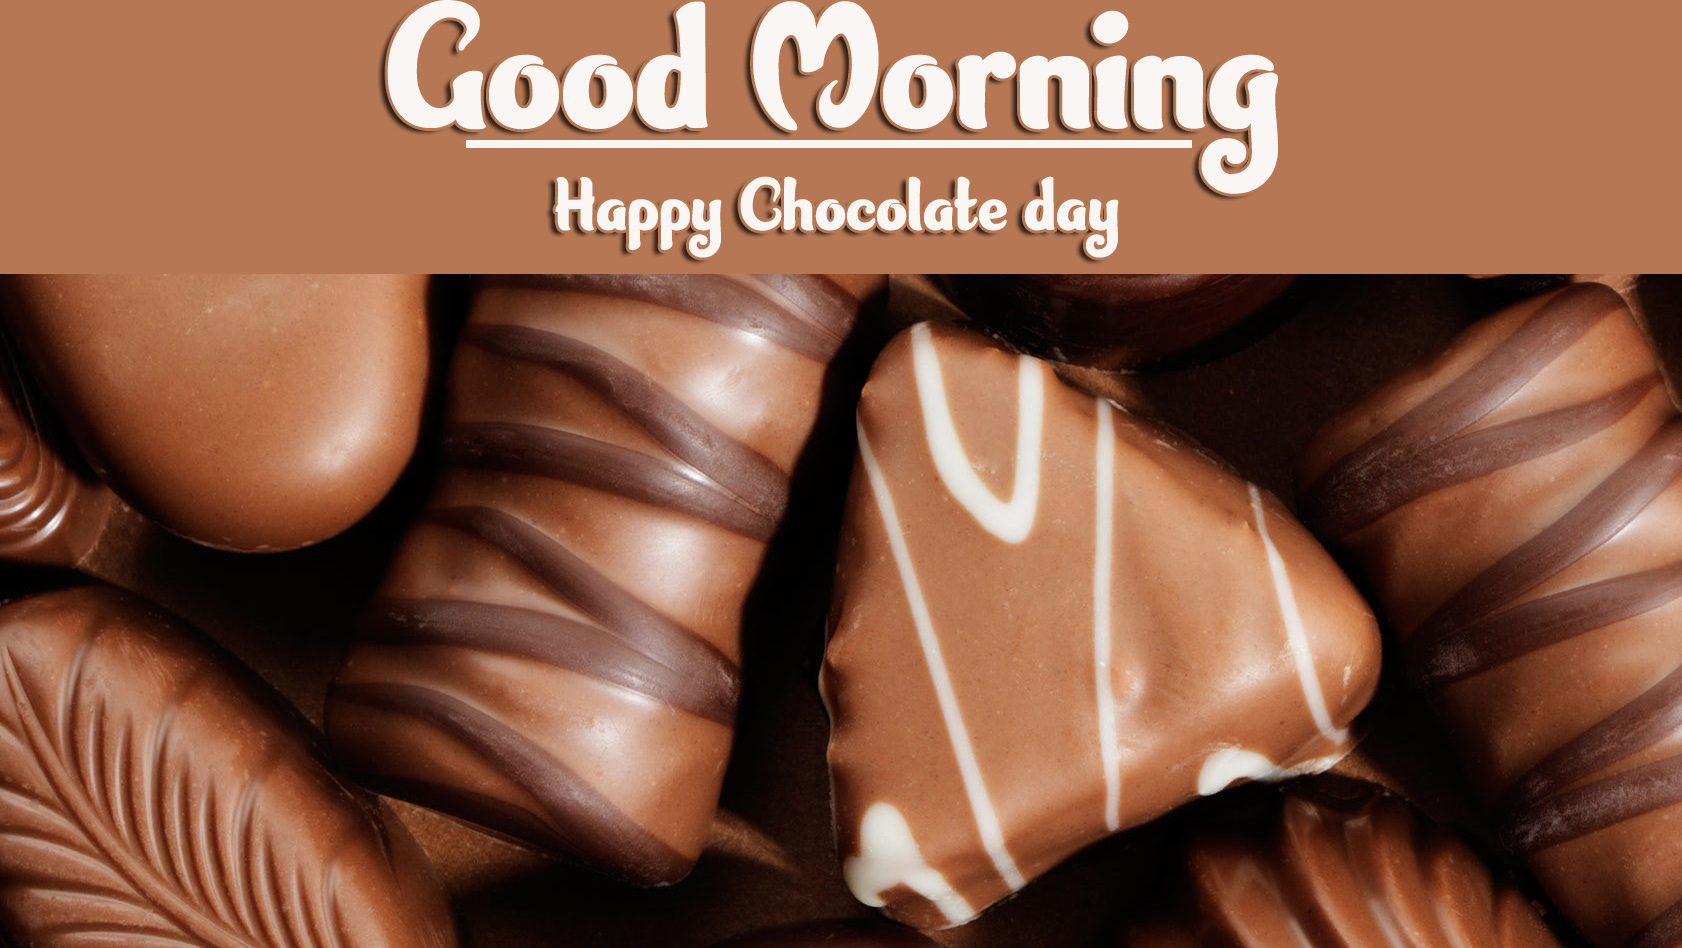 Chocolate Day Good Morning Wallpaper for Whatsapp